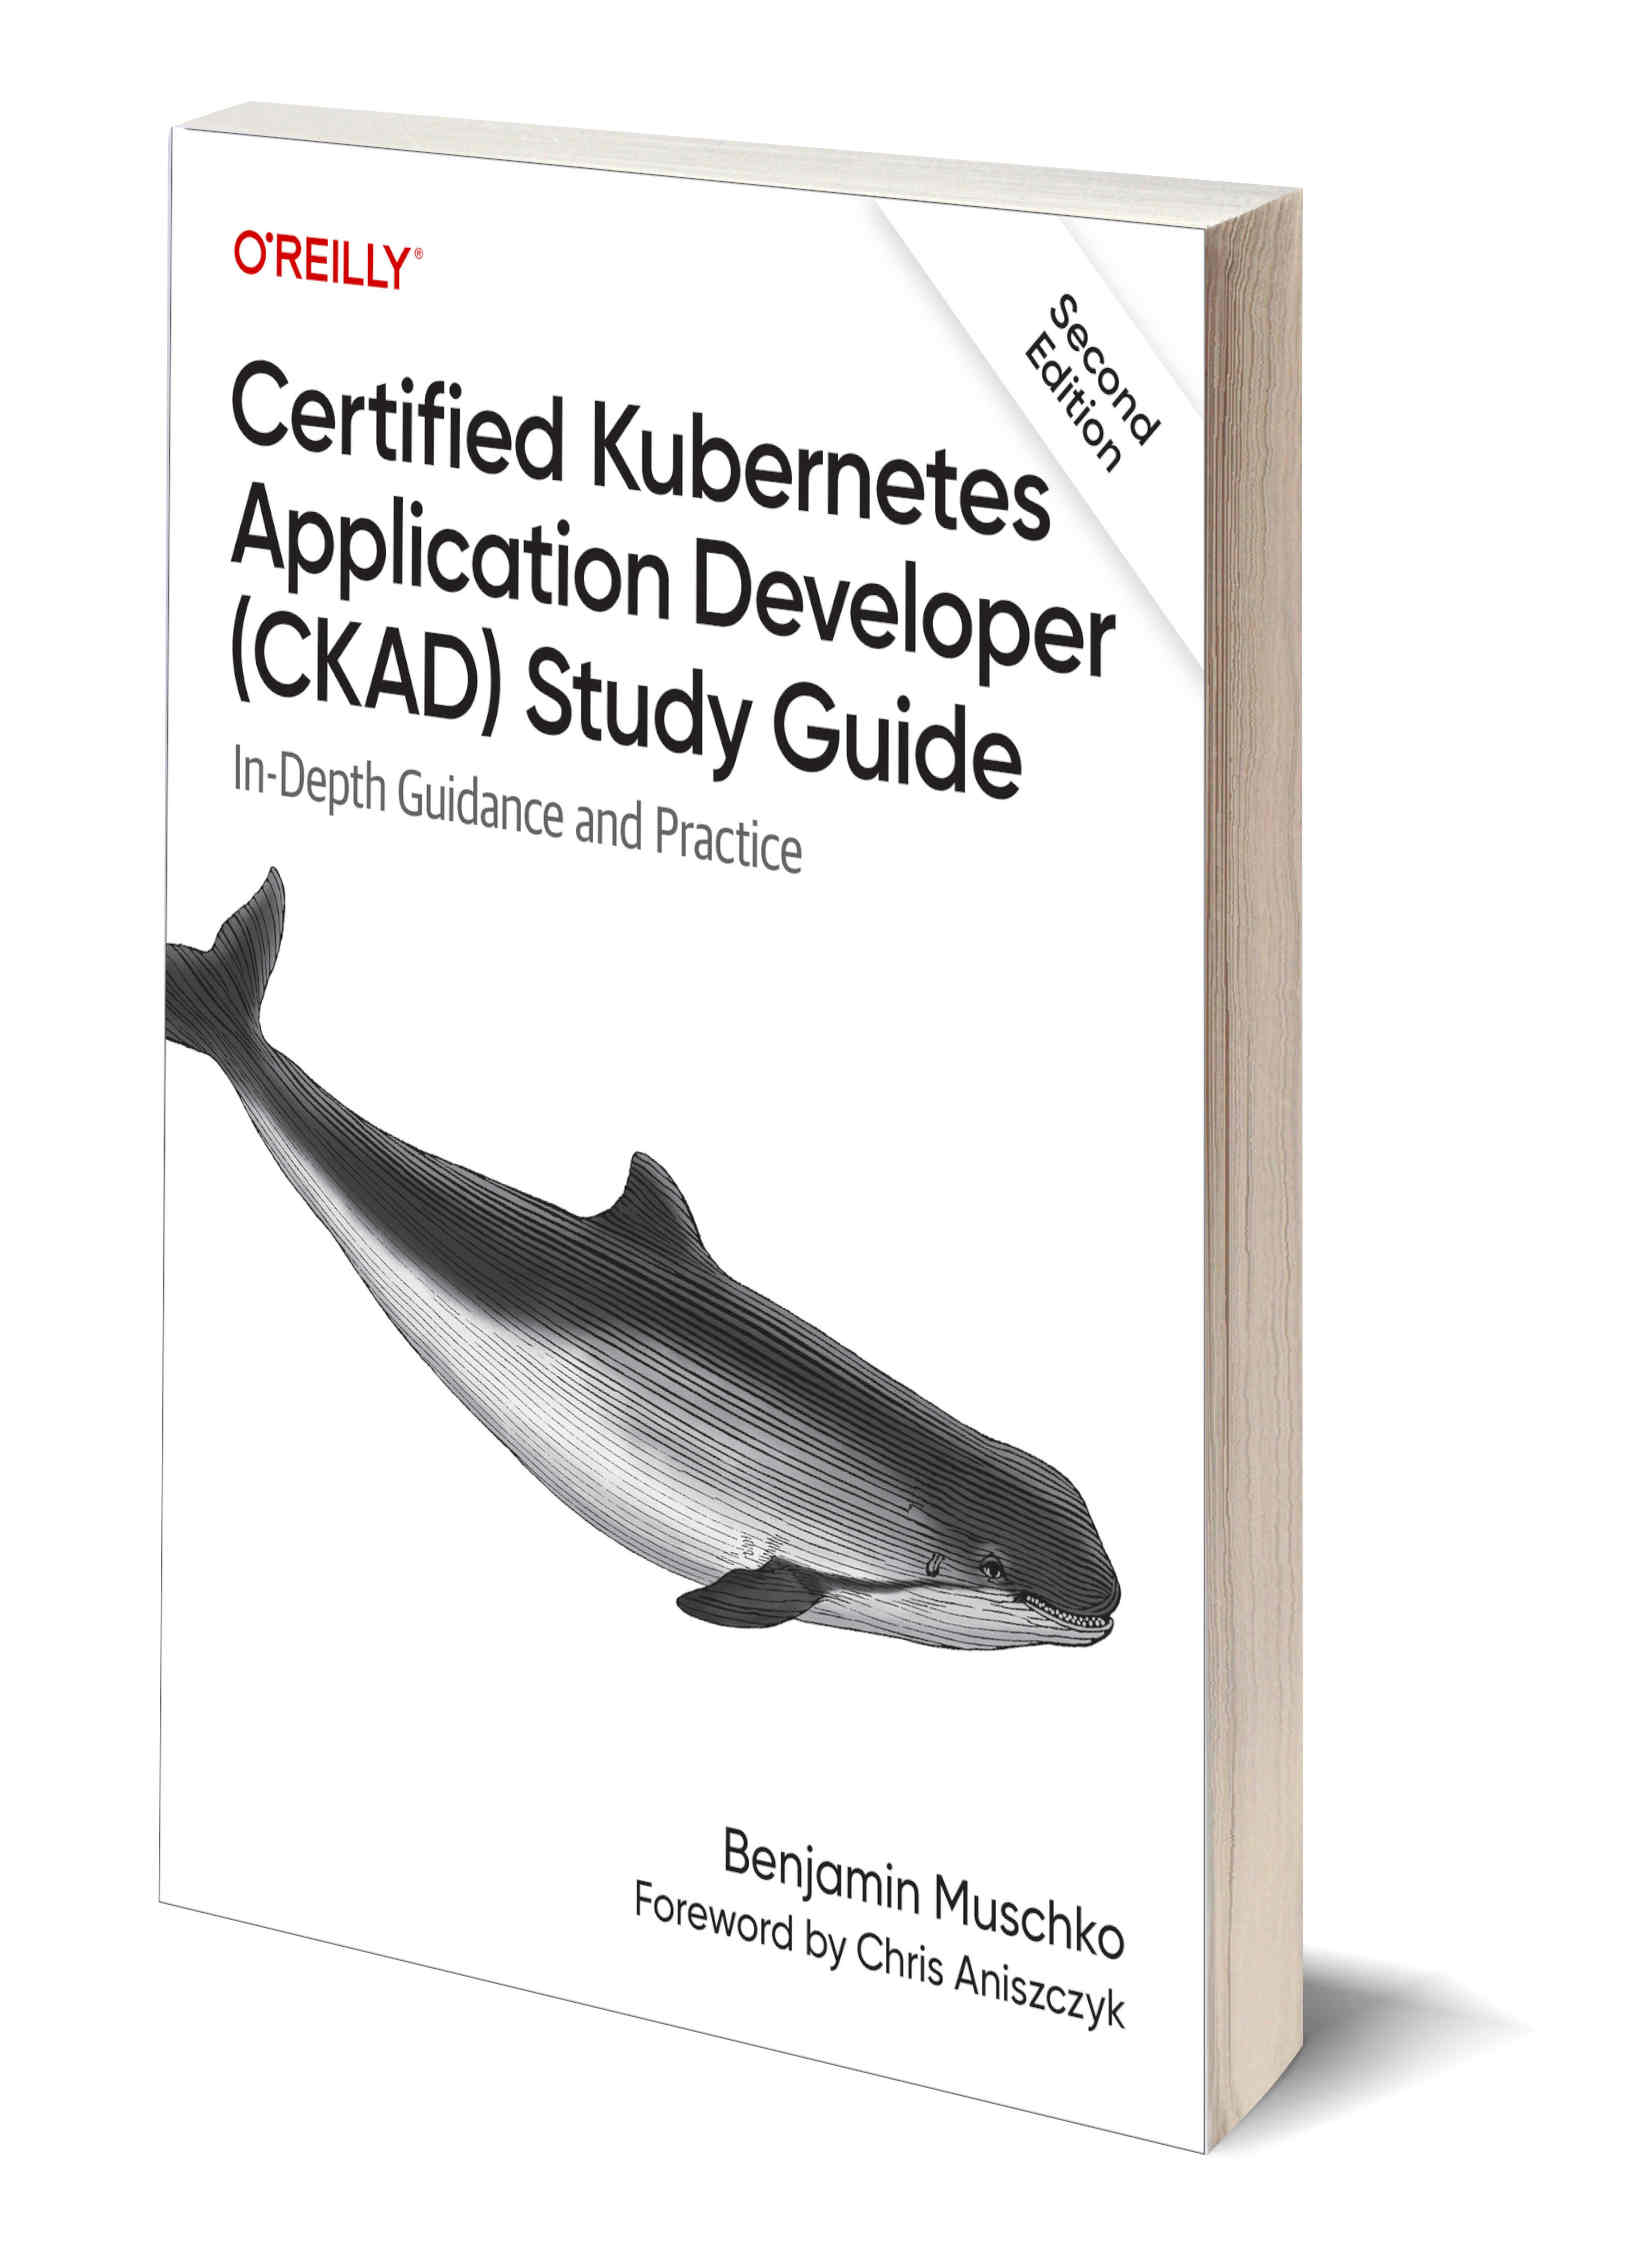 Certified Kubernetes Application Developer (CKAD) Study Guide, 2nd Edition